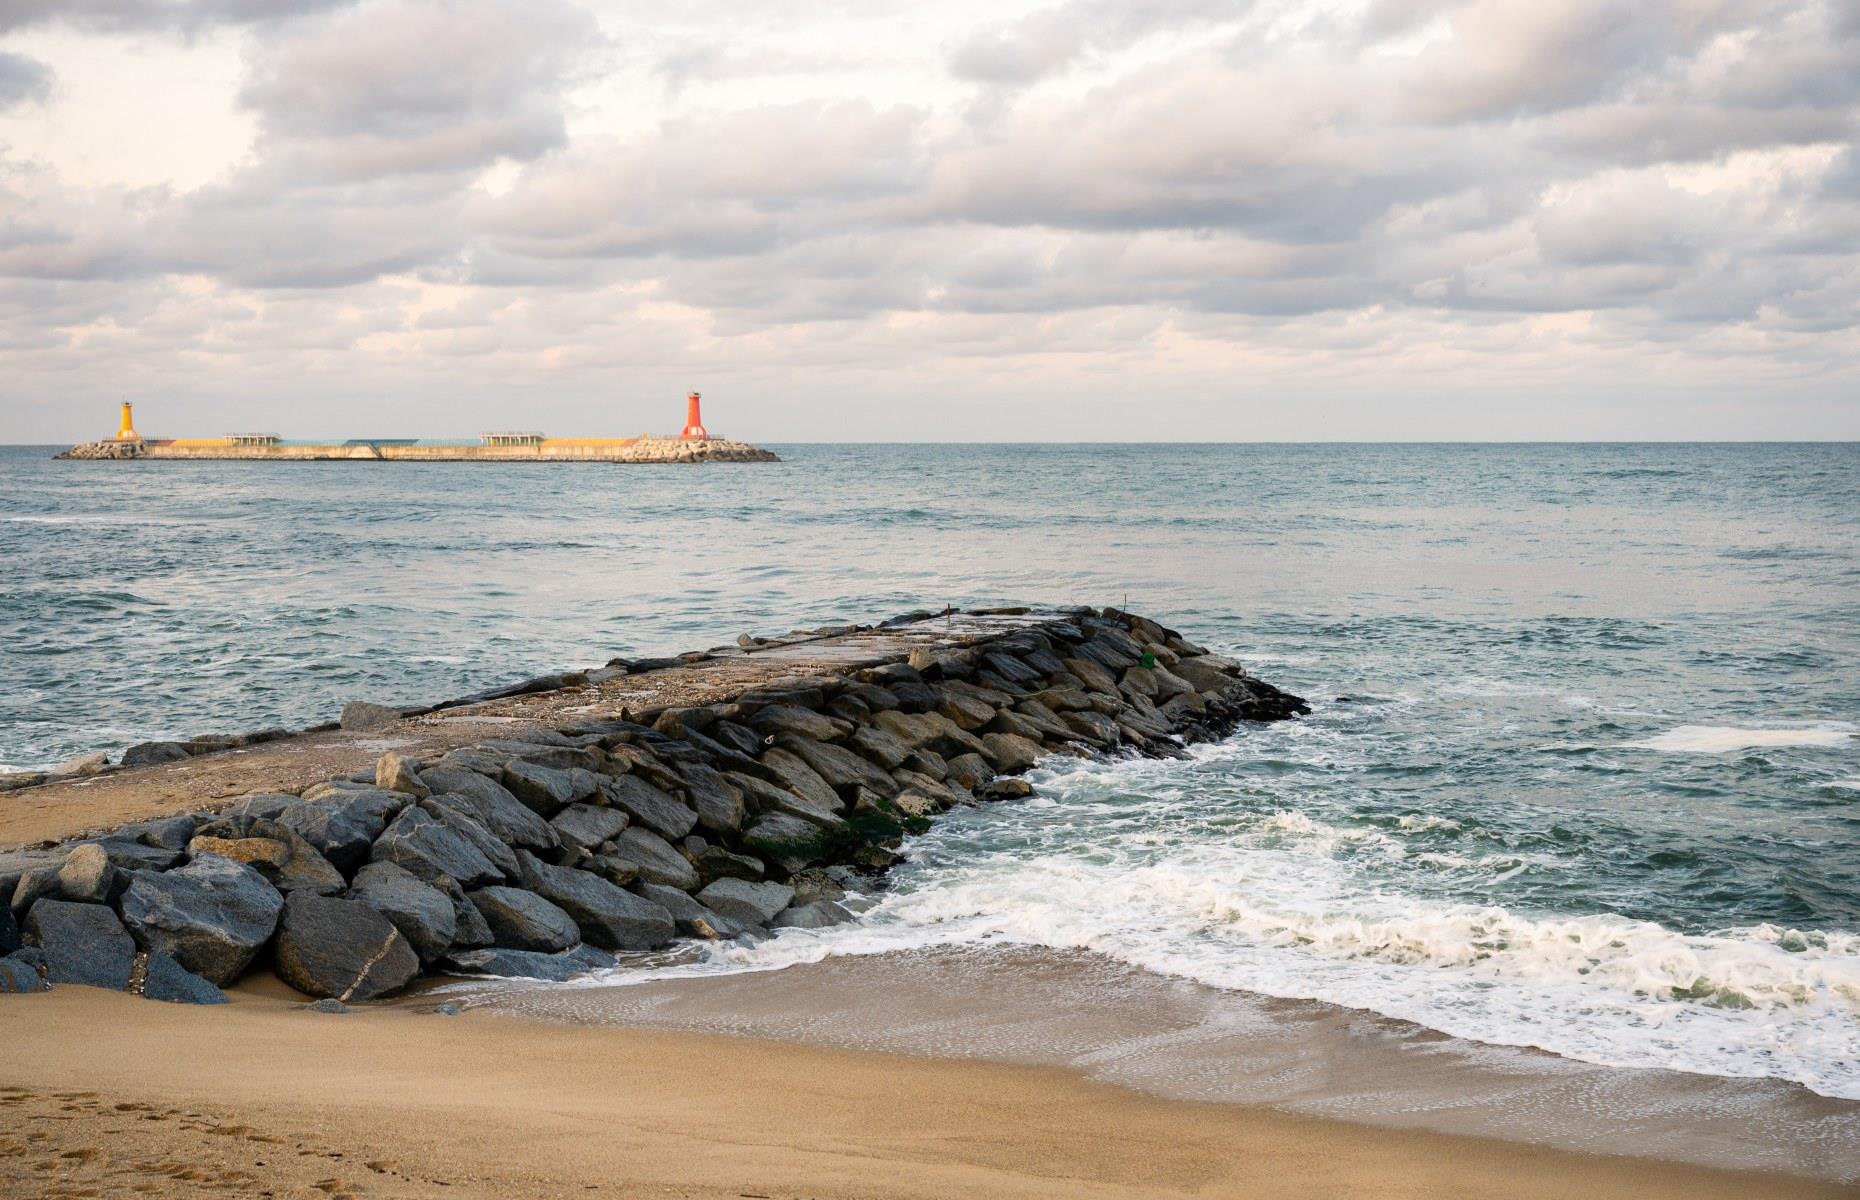 <p>Gangneung is a popular K-drama filming location. Head to Jumunjin Breakwater, pictured, to recreate the classic scene from <em>Goblin</em> (if you know, you know) and spot a series of colorful lighthouses. A little way up the road you’ll find the famous BTS Bus Stop, where the K-pop superband BTS shot their <em>You Never Walk Alone</em> album cover.</p>